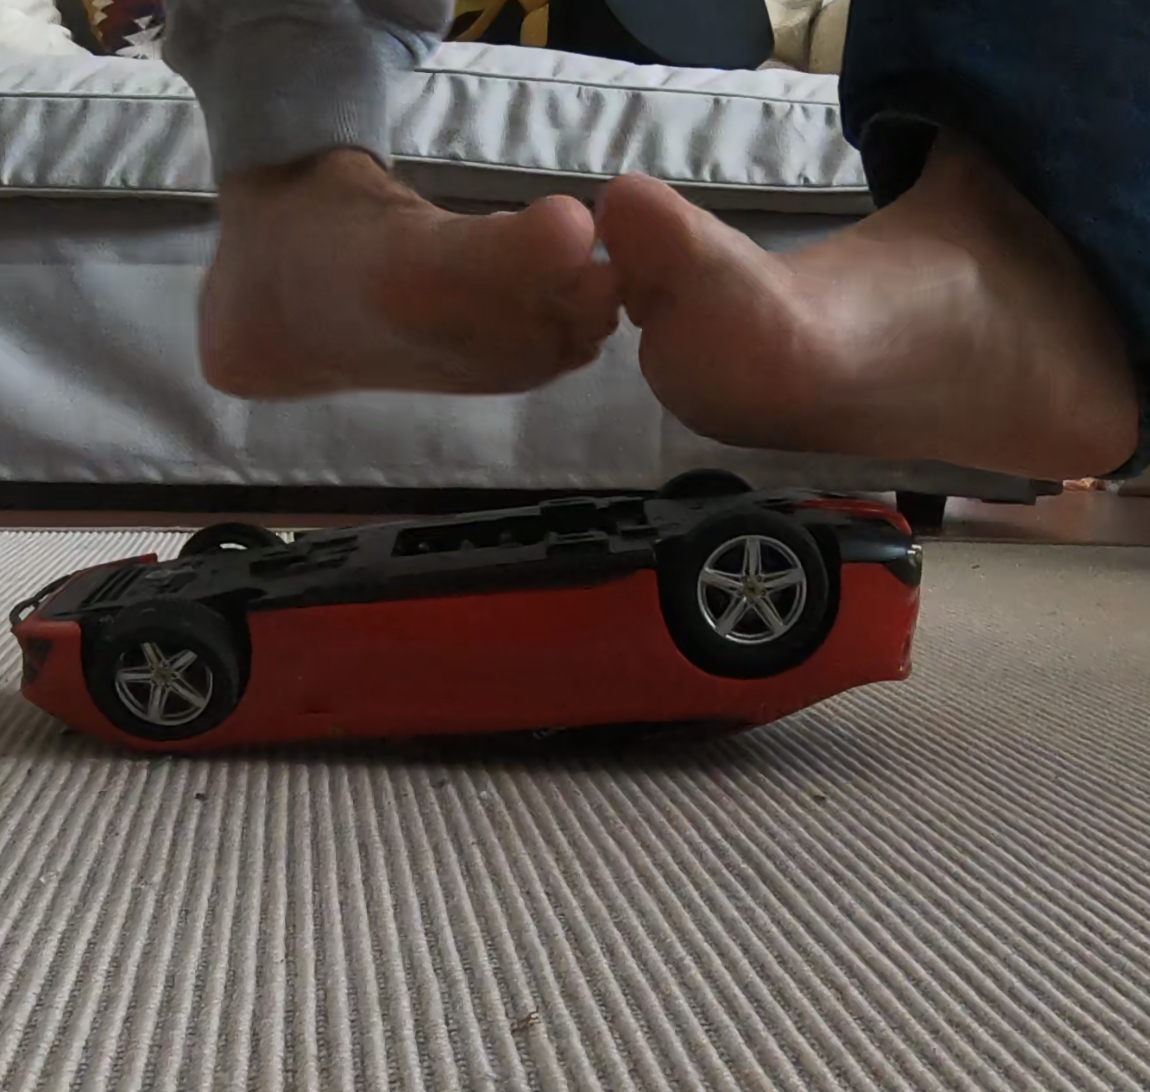 Toy car stomped barefoot & with Nike Shox